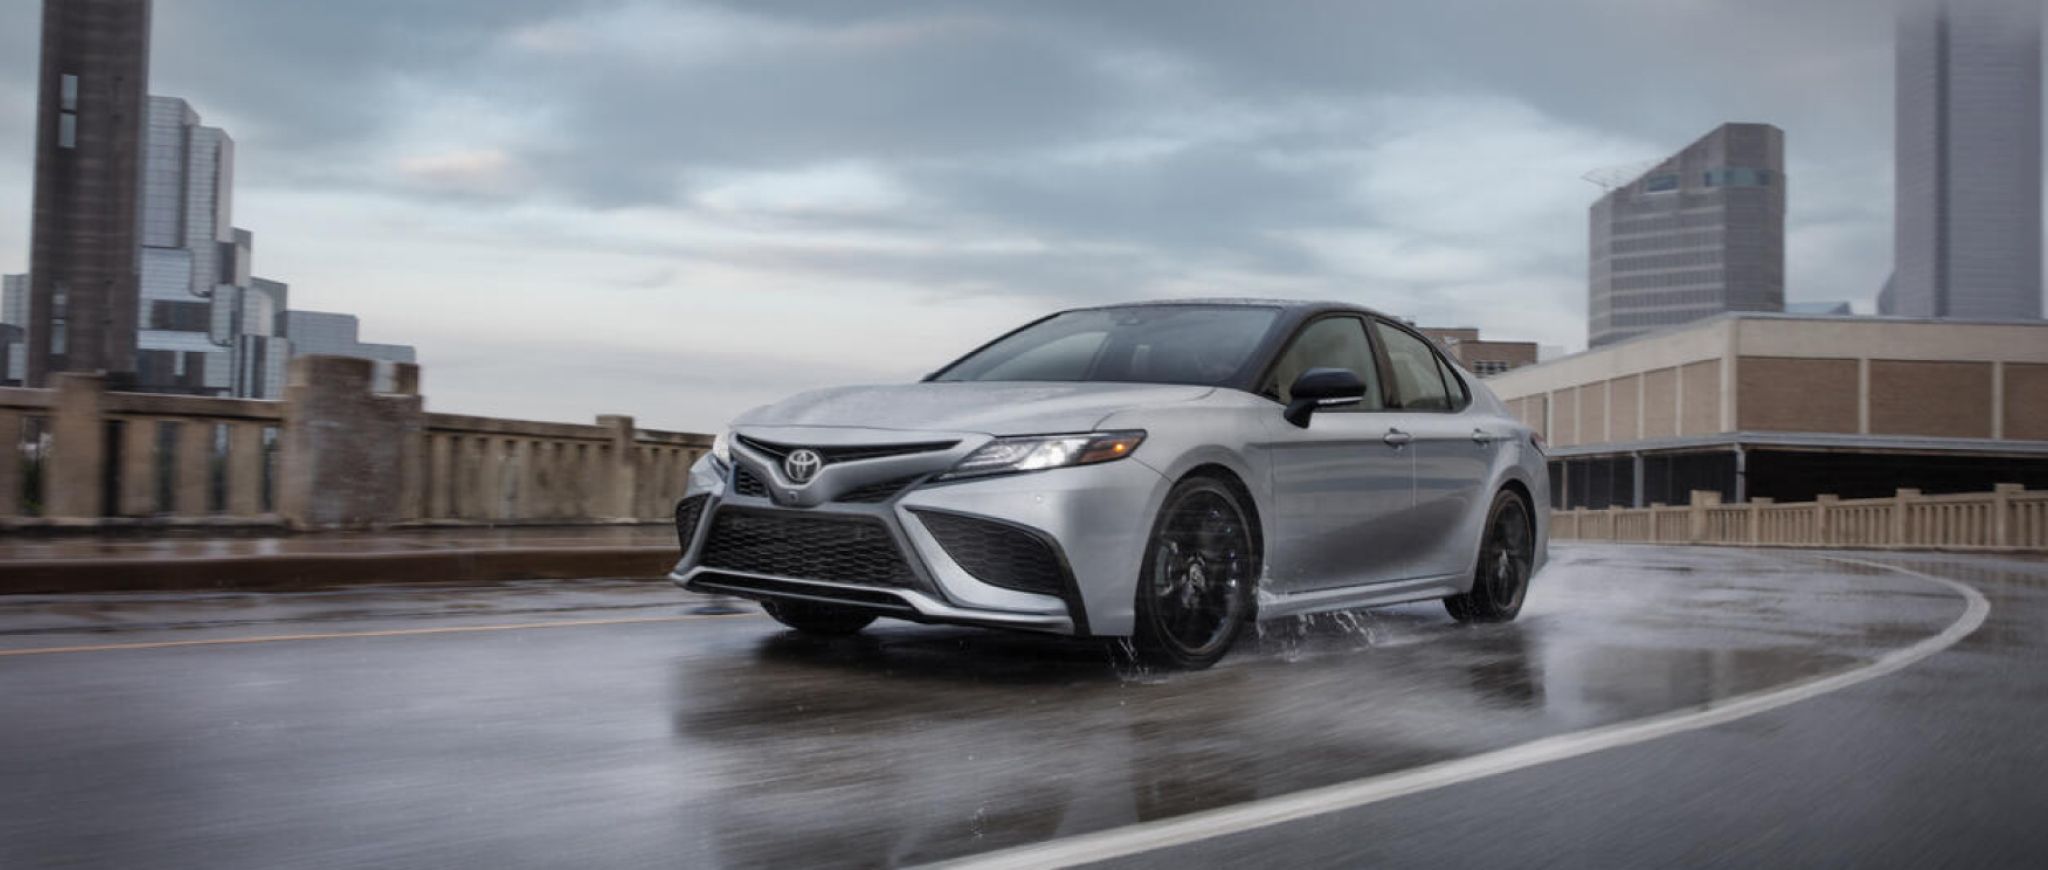 A 2022 Toyota Camry XSE on a rain-covered street